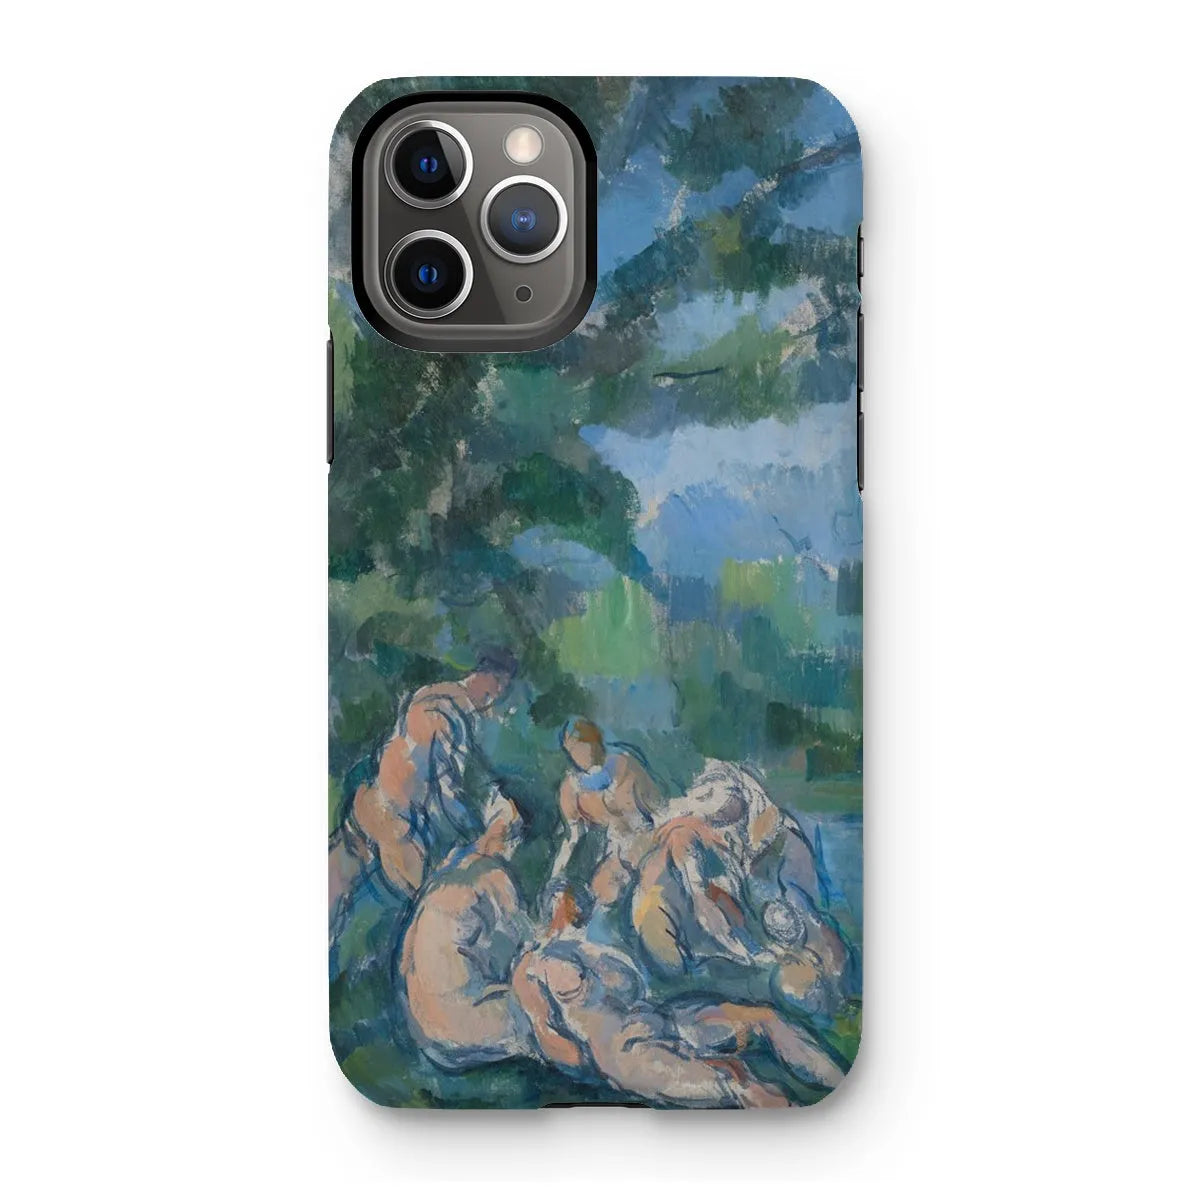 The Bathers - Post-impressionism Phone Case - Paul Cezanne - Iphone 11 Pro / Matte - Mobile Phone Cases - Aesthetic Art